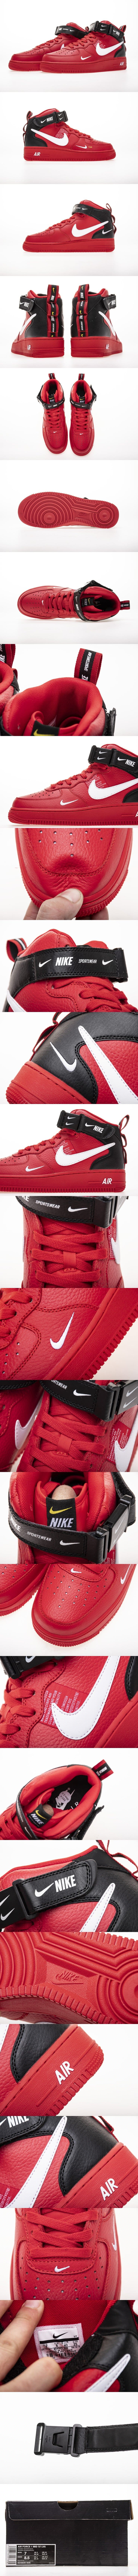 Nike Air Force1High 07 LV8 Red 804609-605 エアフォース１ 07 Lv8 レッド